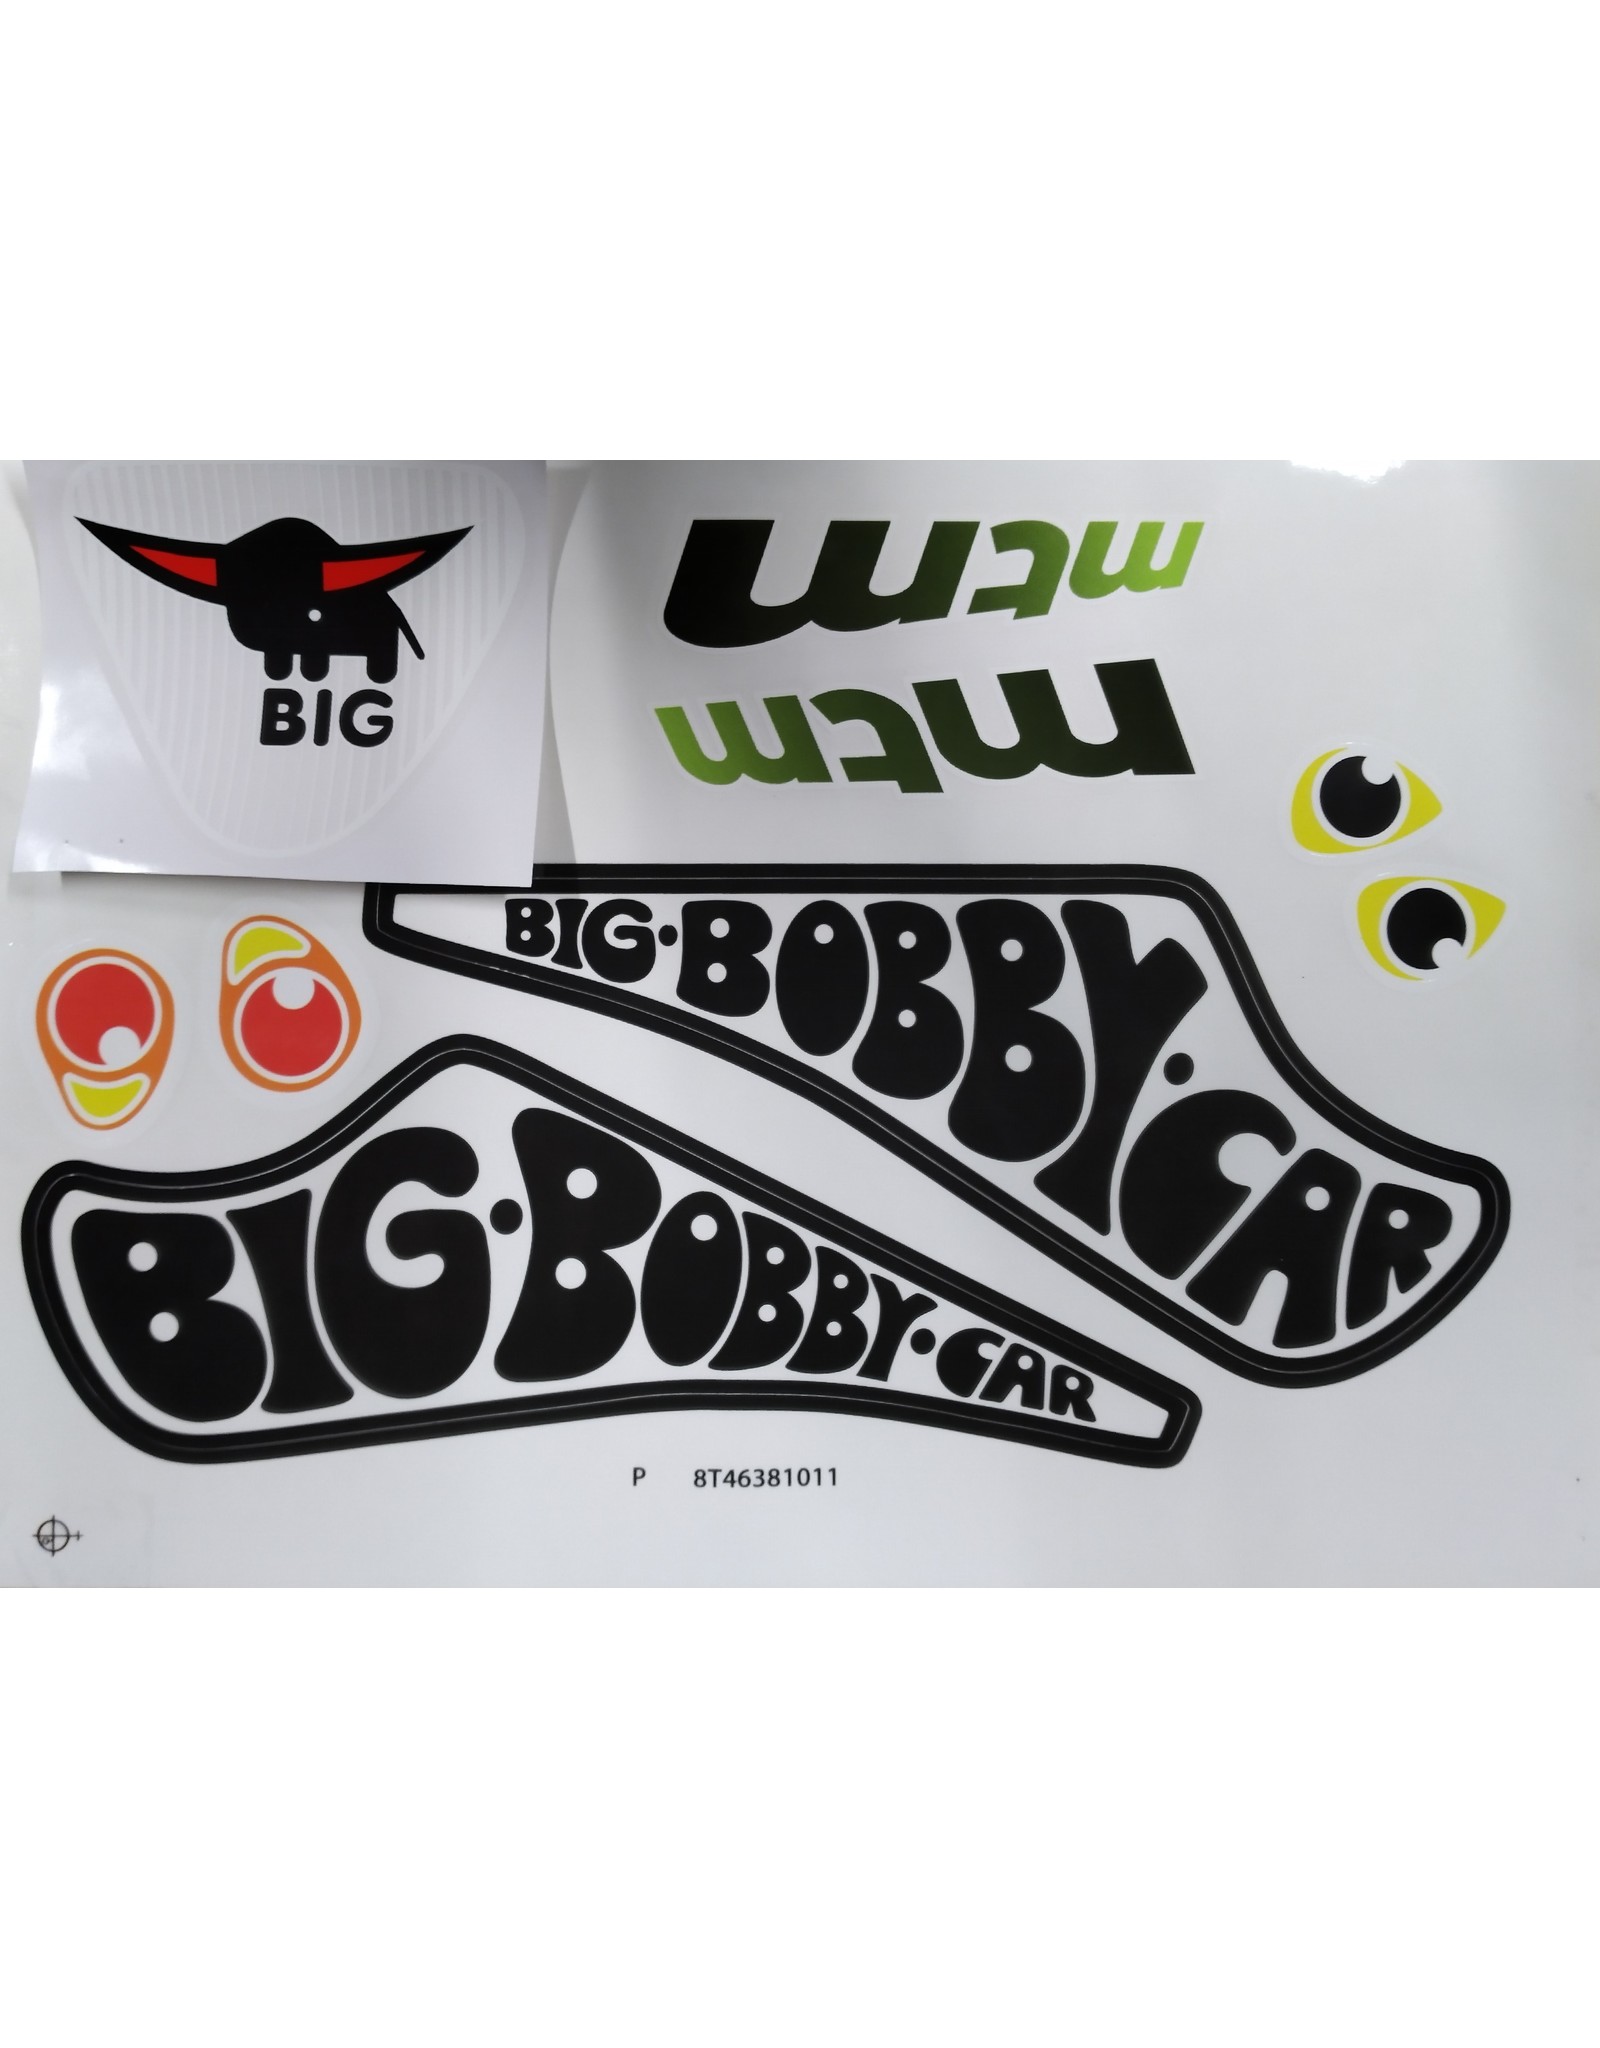 BIG Bobby Car Stickers Decal Set Classic Racer 